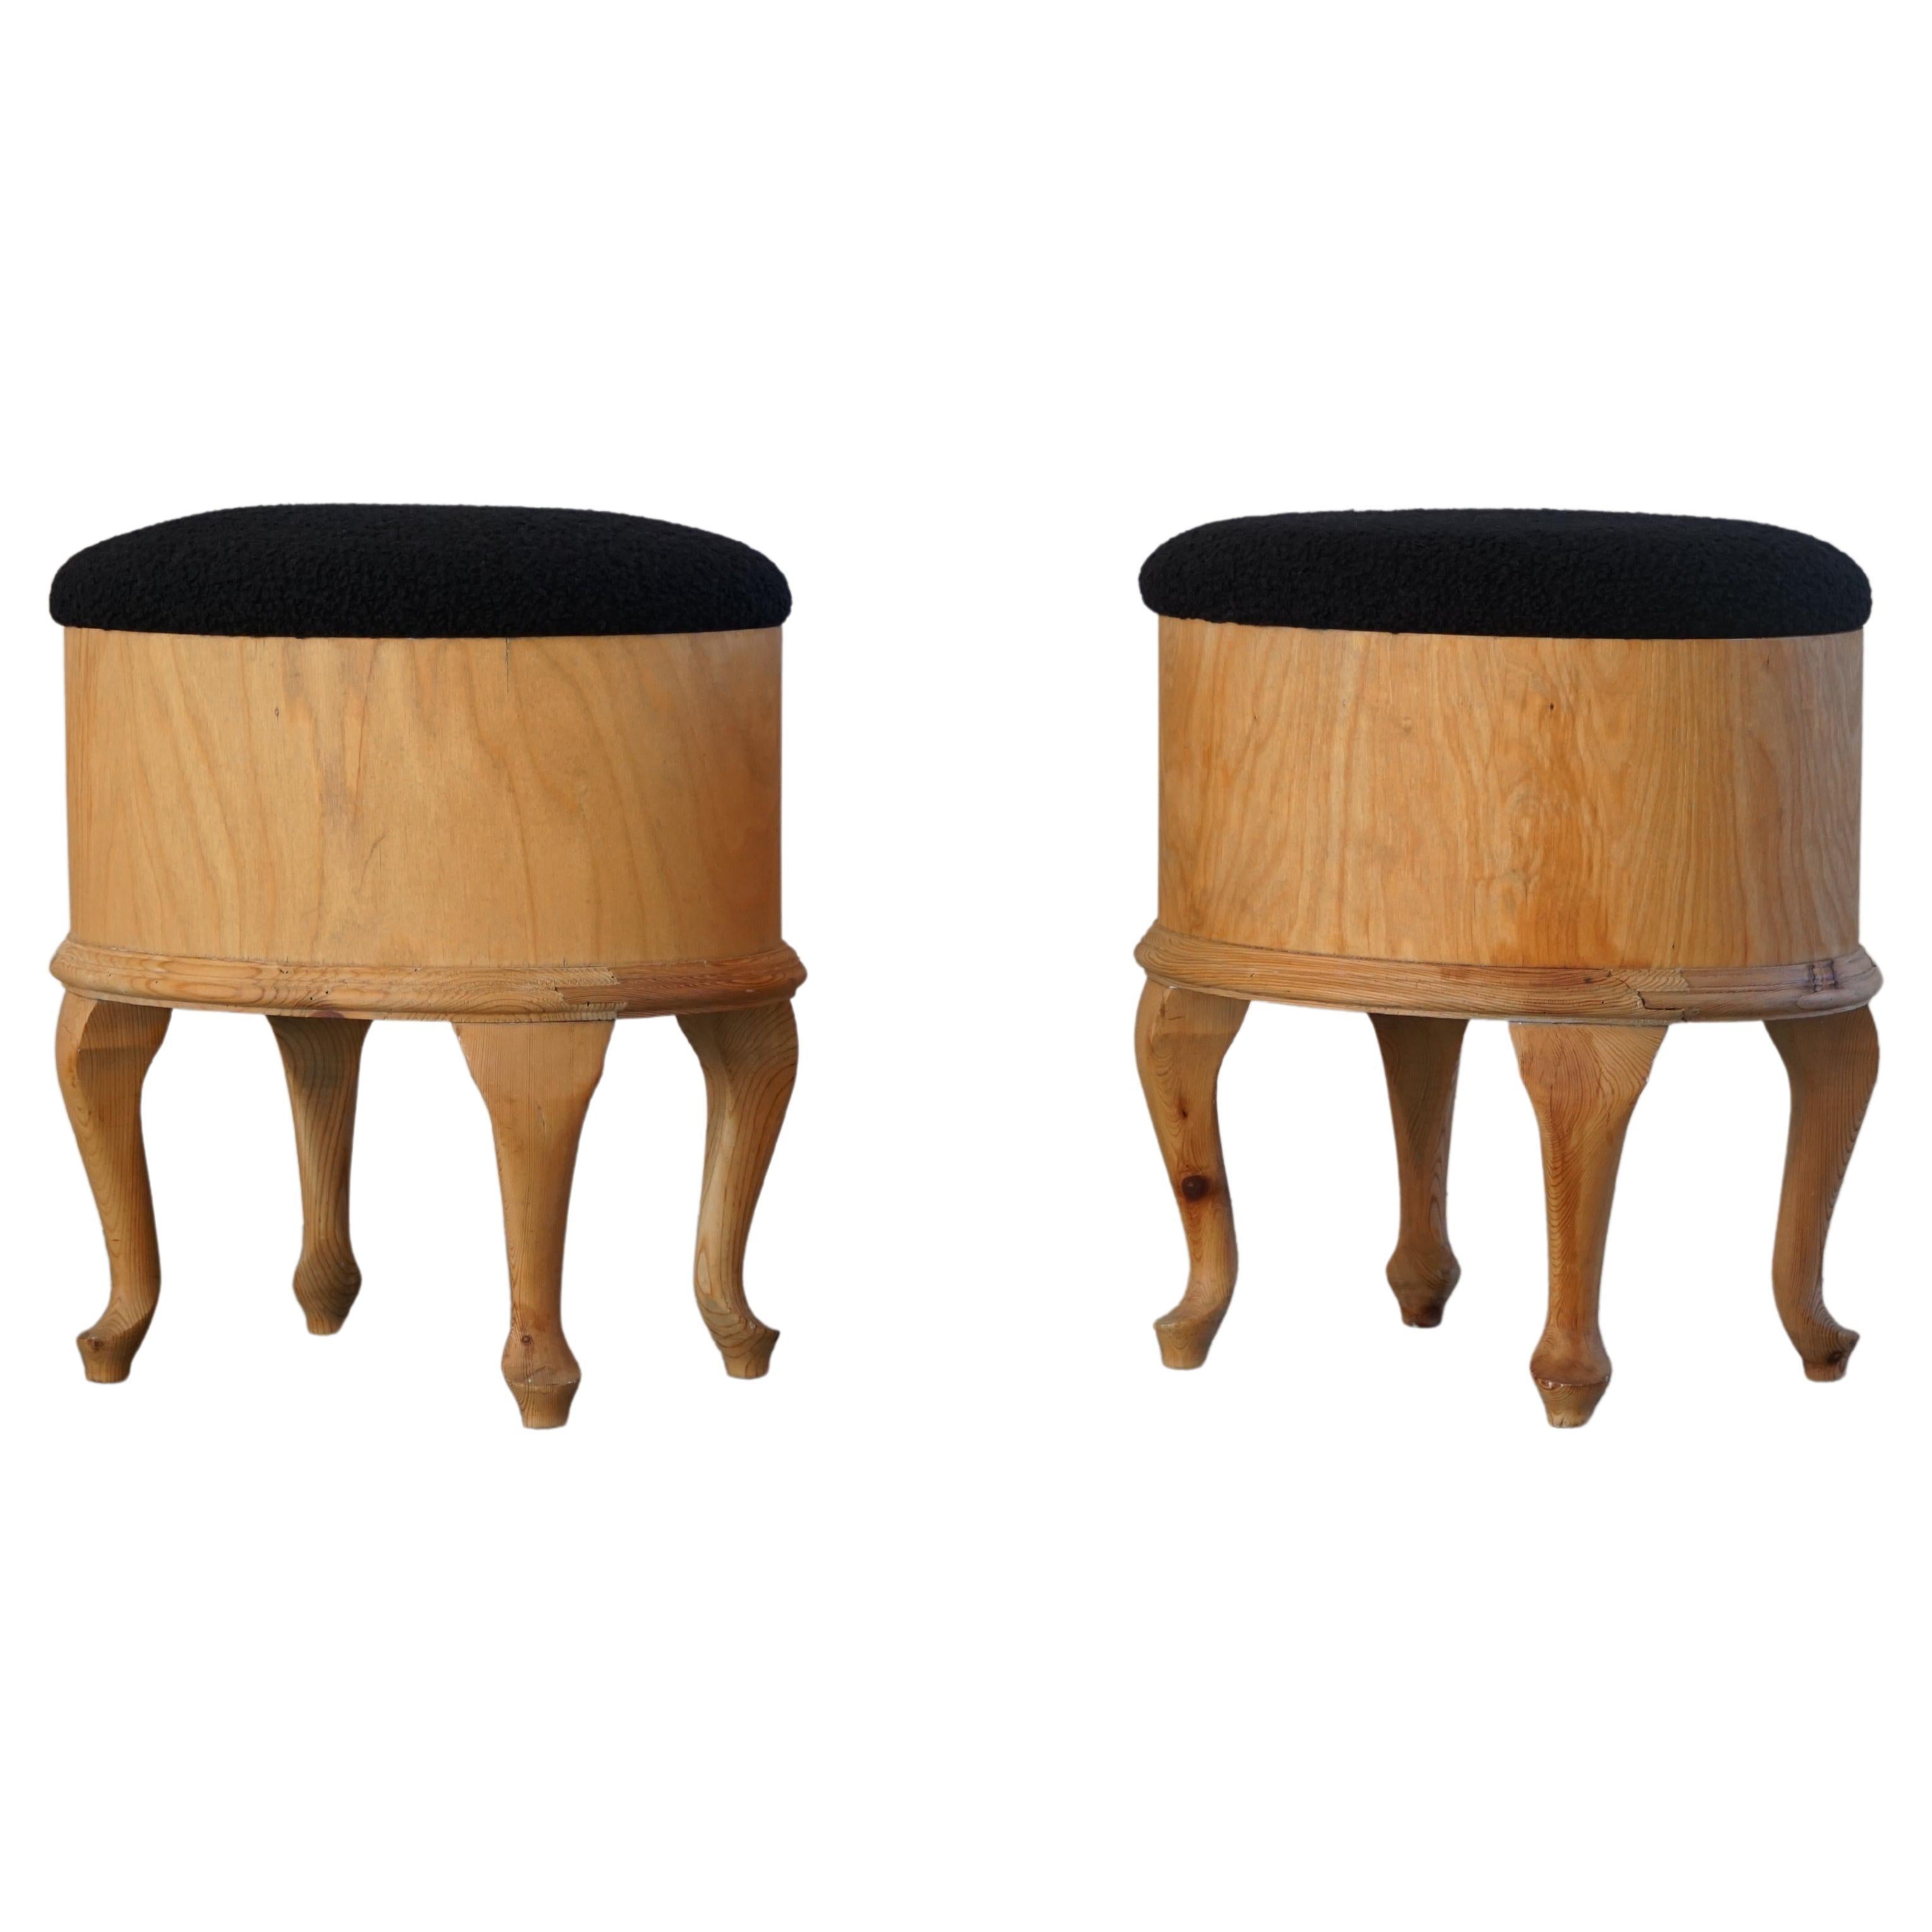 Pair of Stools with Storage in Pine and Reupholstered in Bouclé, Danish Modern